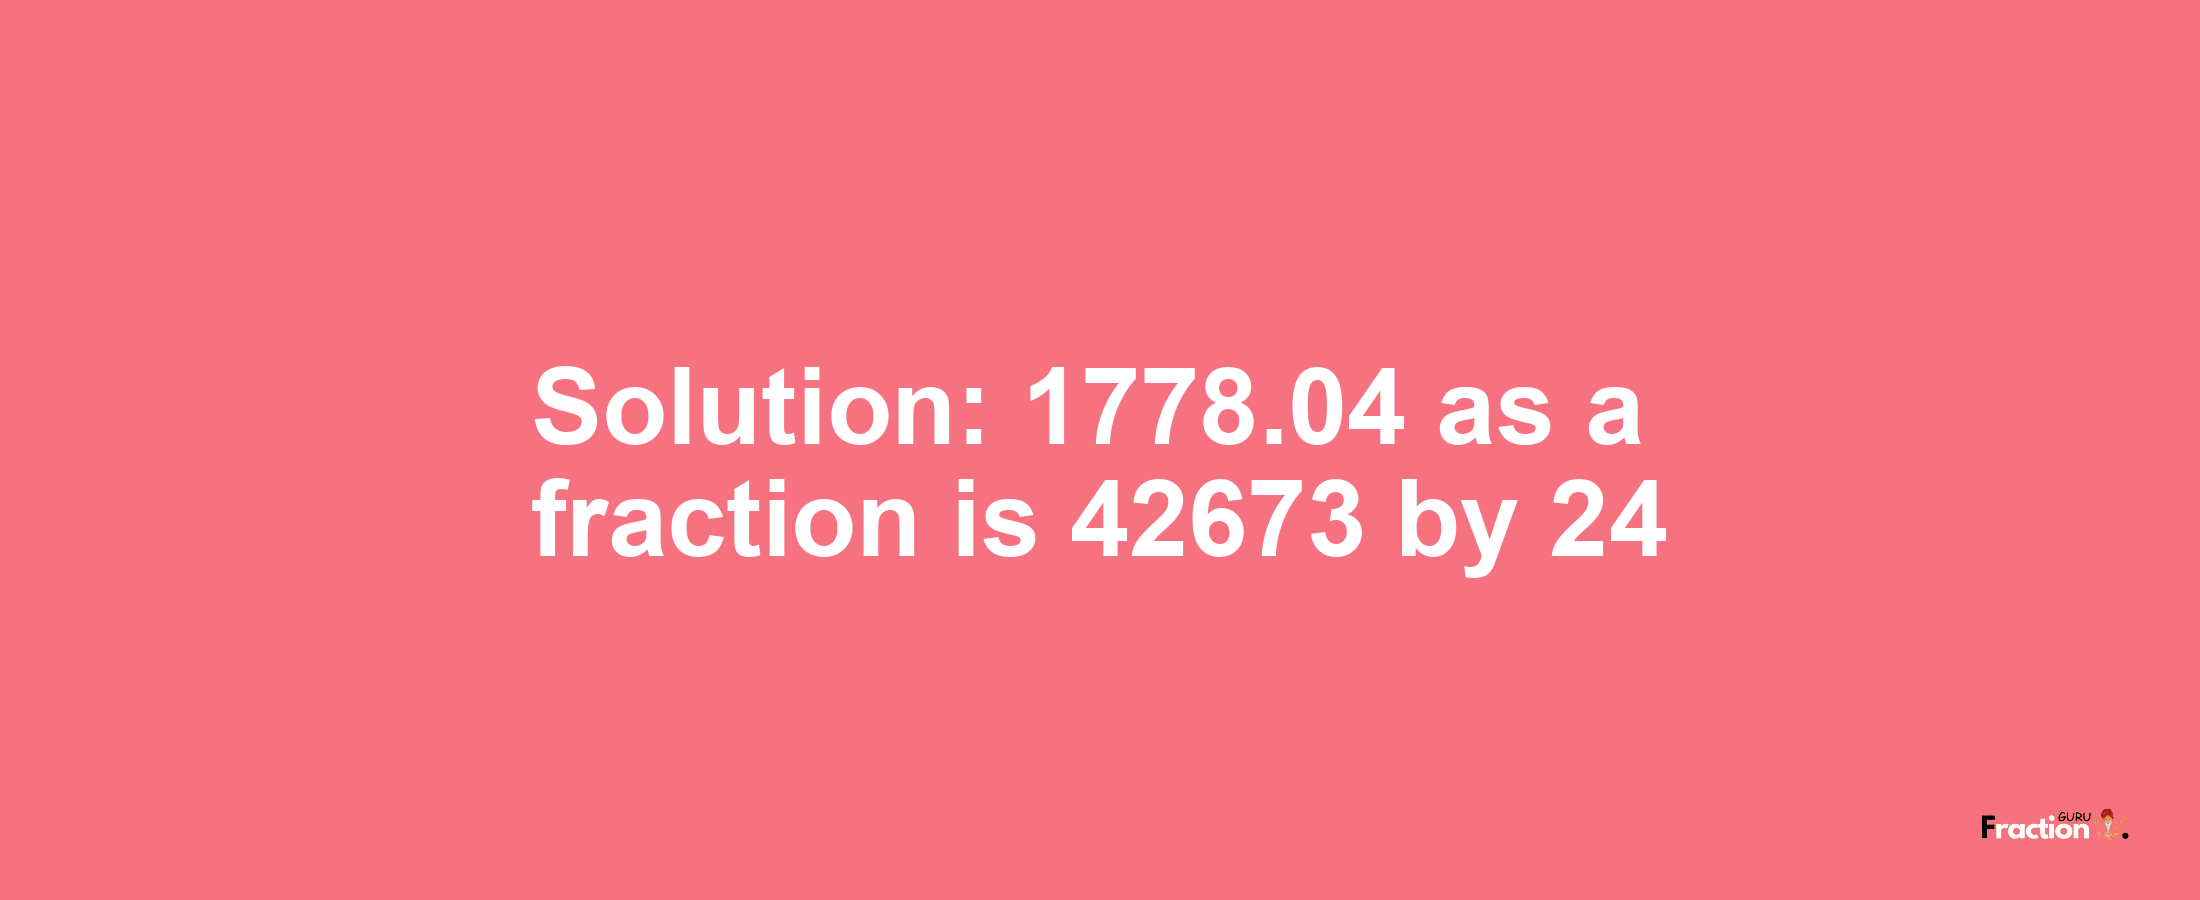 Solution:1778.04 as a fraction is 42673/24